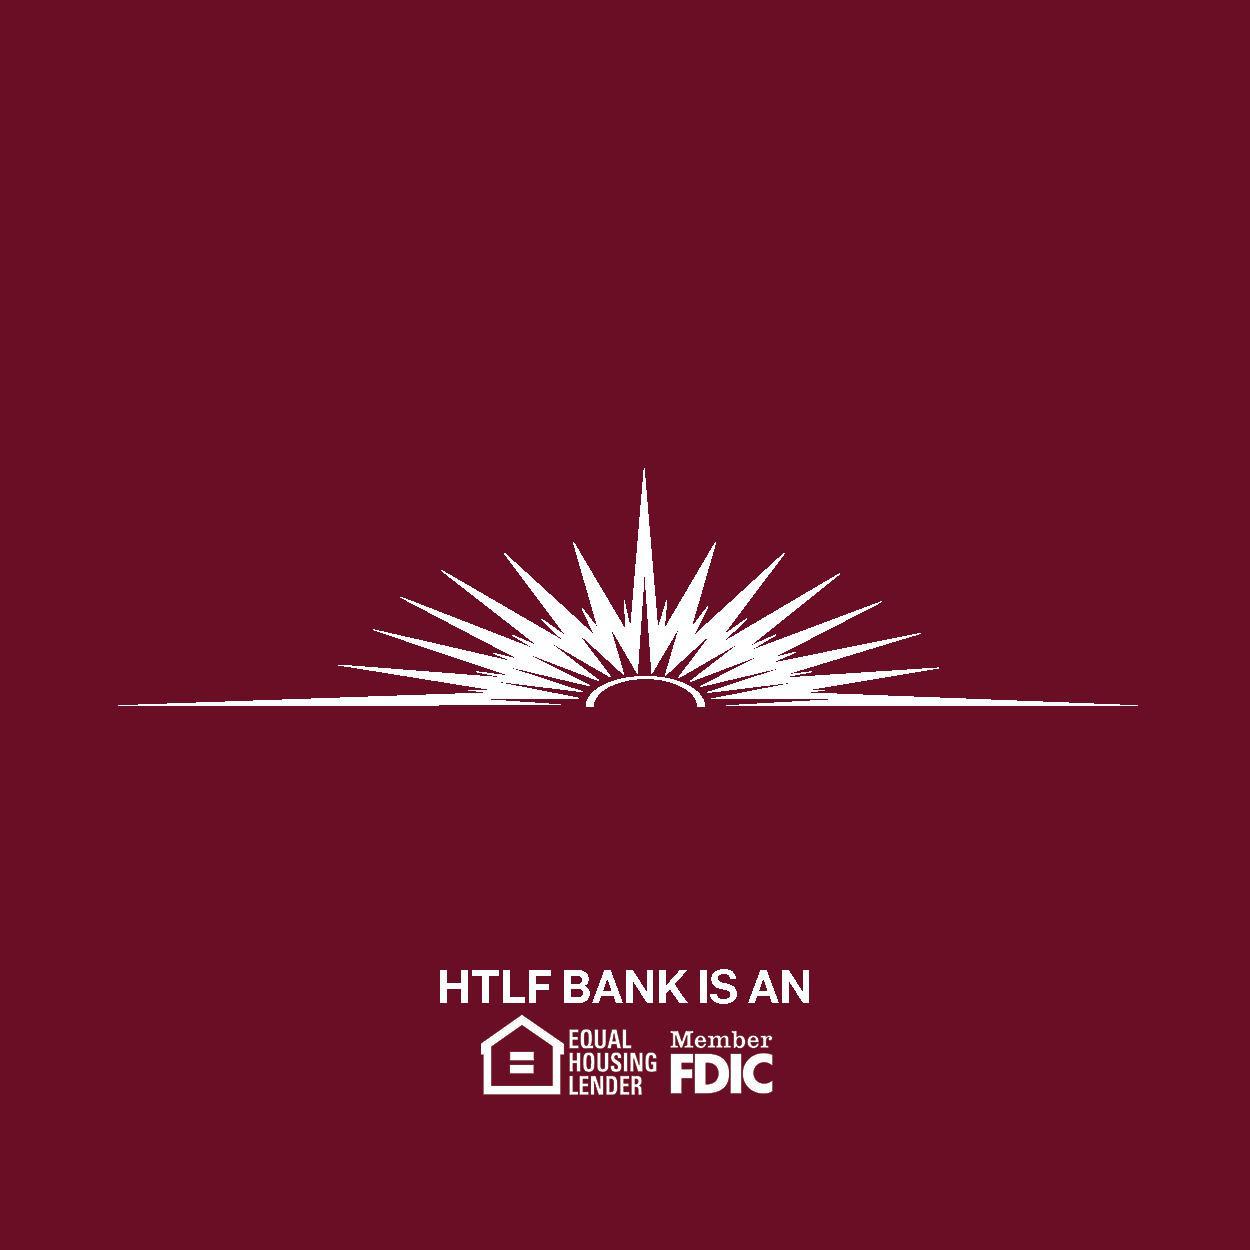 Citywide Banks, a division of HTLF Bank